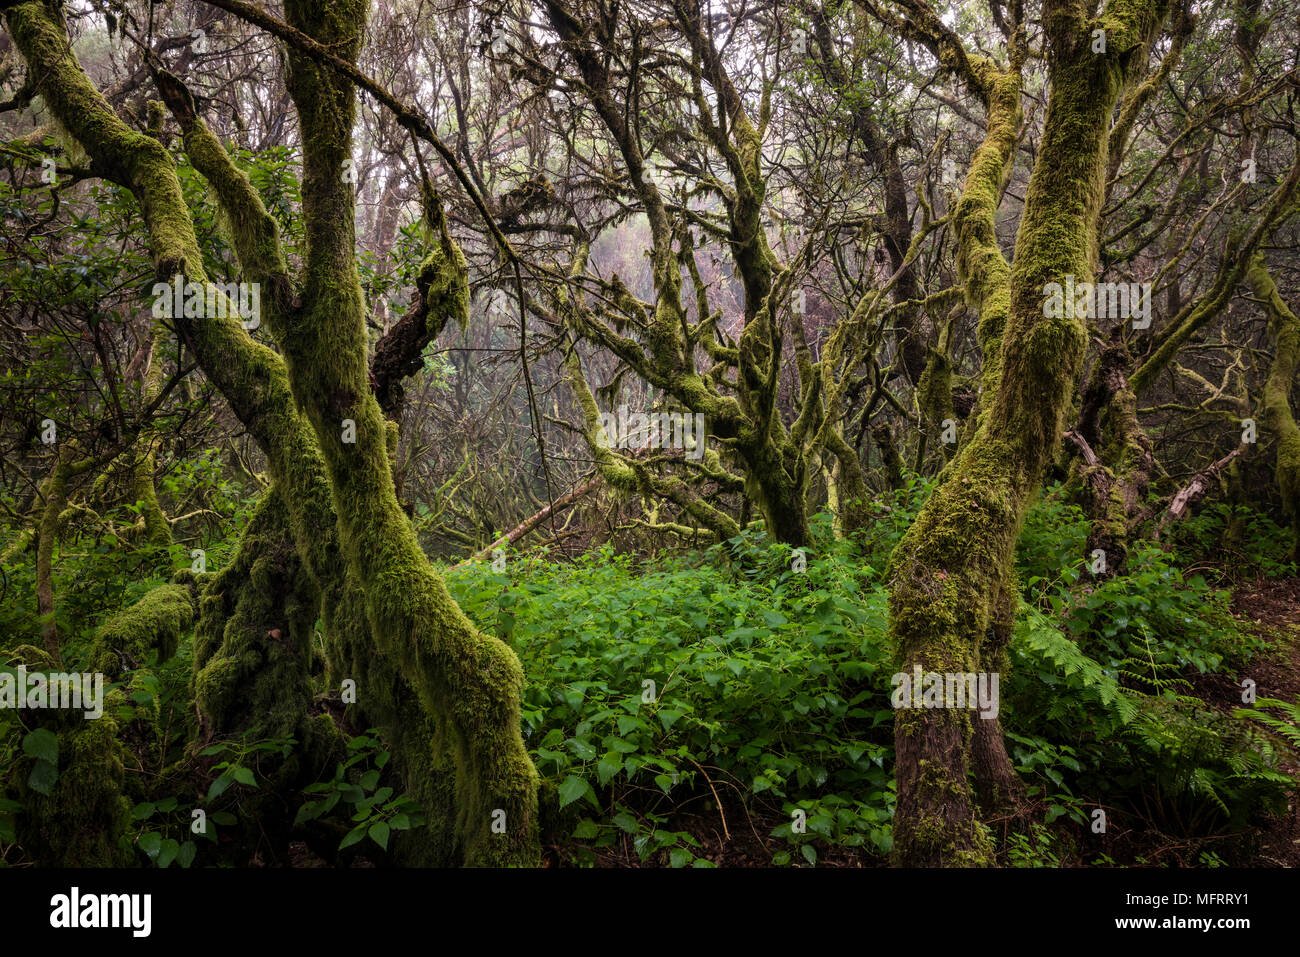 Moss-covered trees in the fog forest, laurel forest, Raya la Llania, El Hierro, Canary Islands, Spain Stock Photo